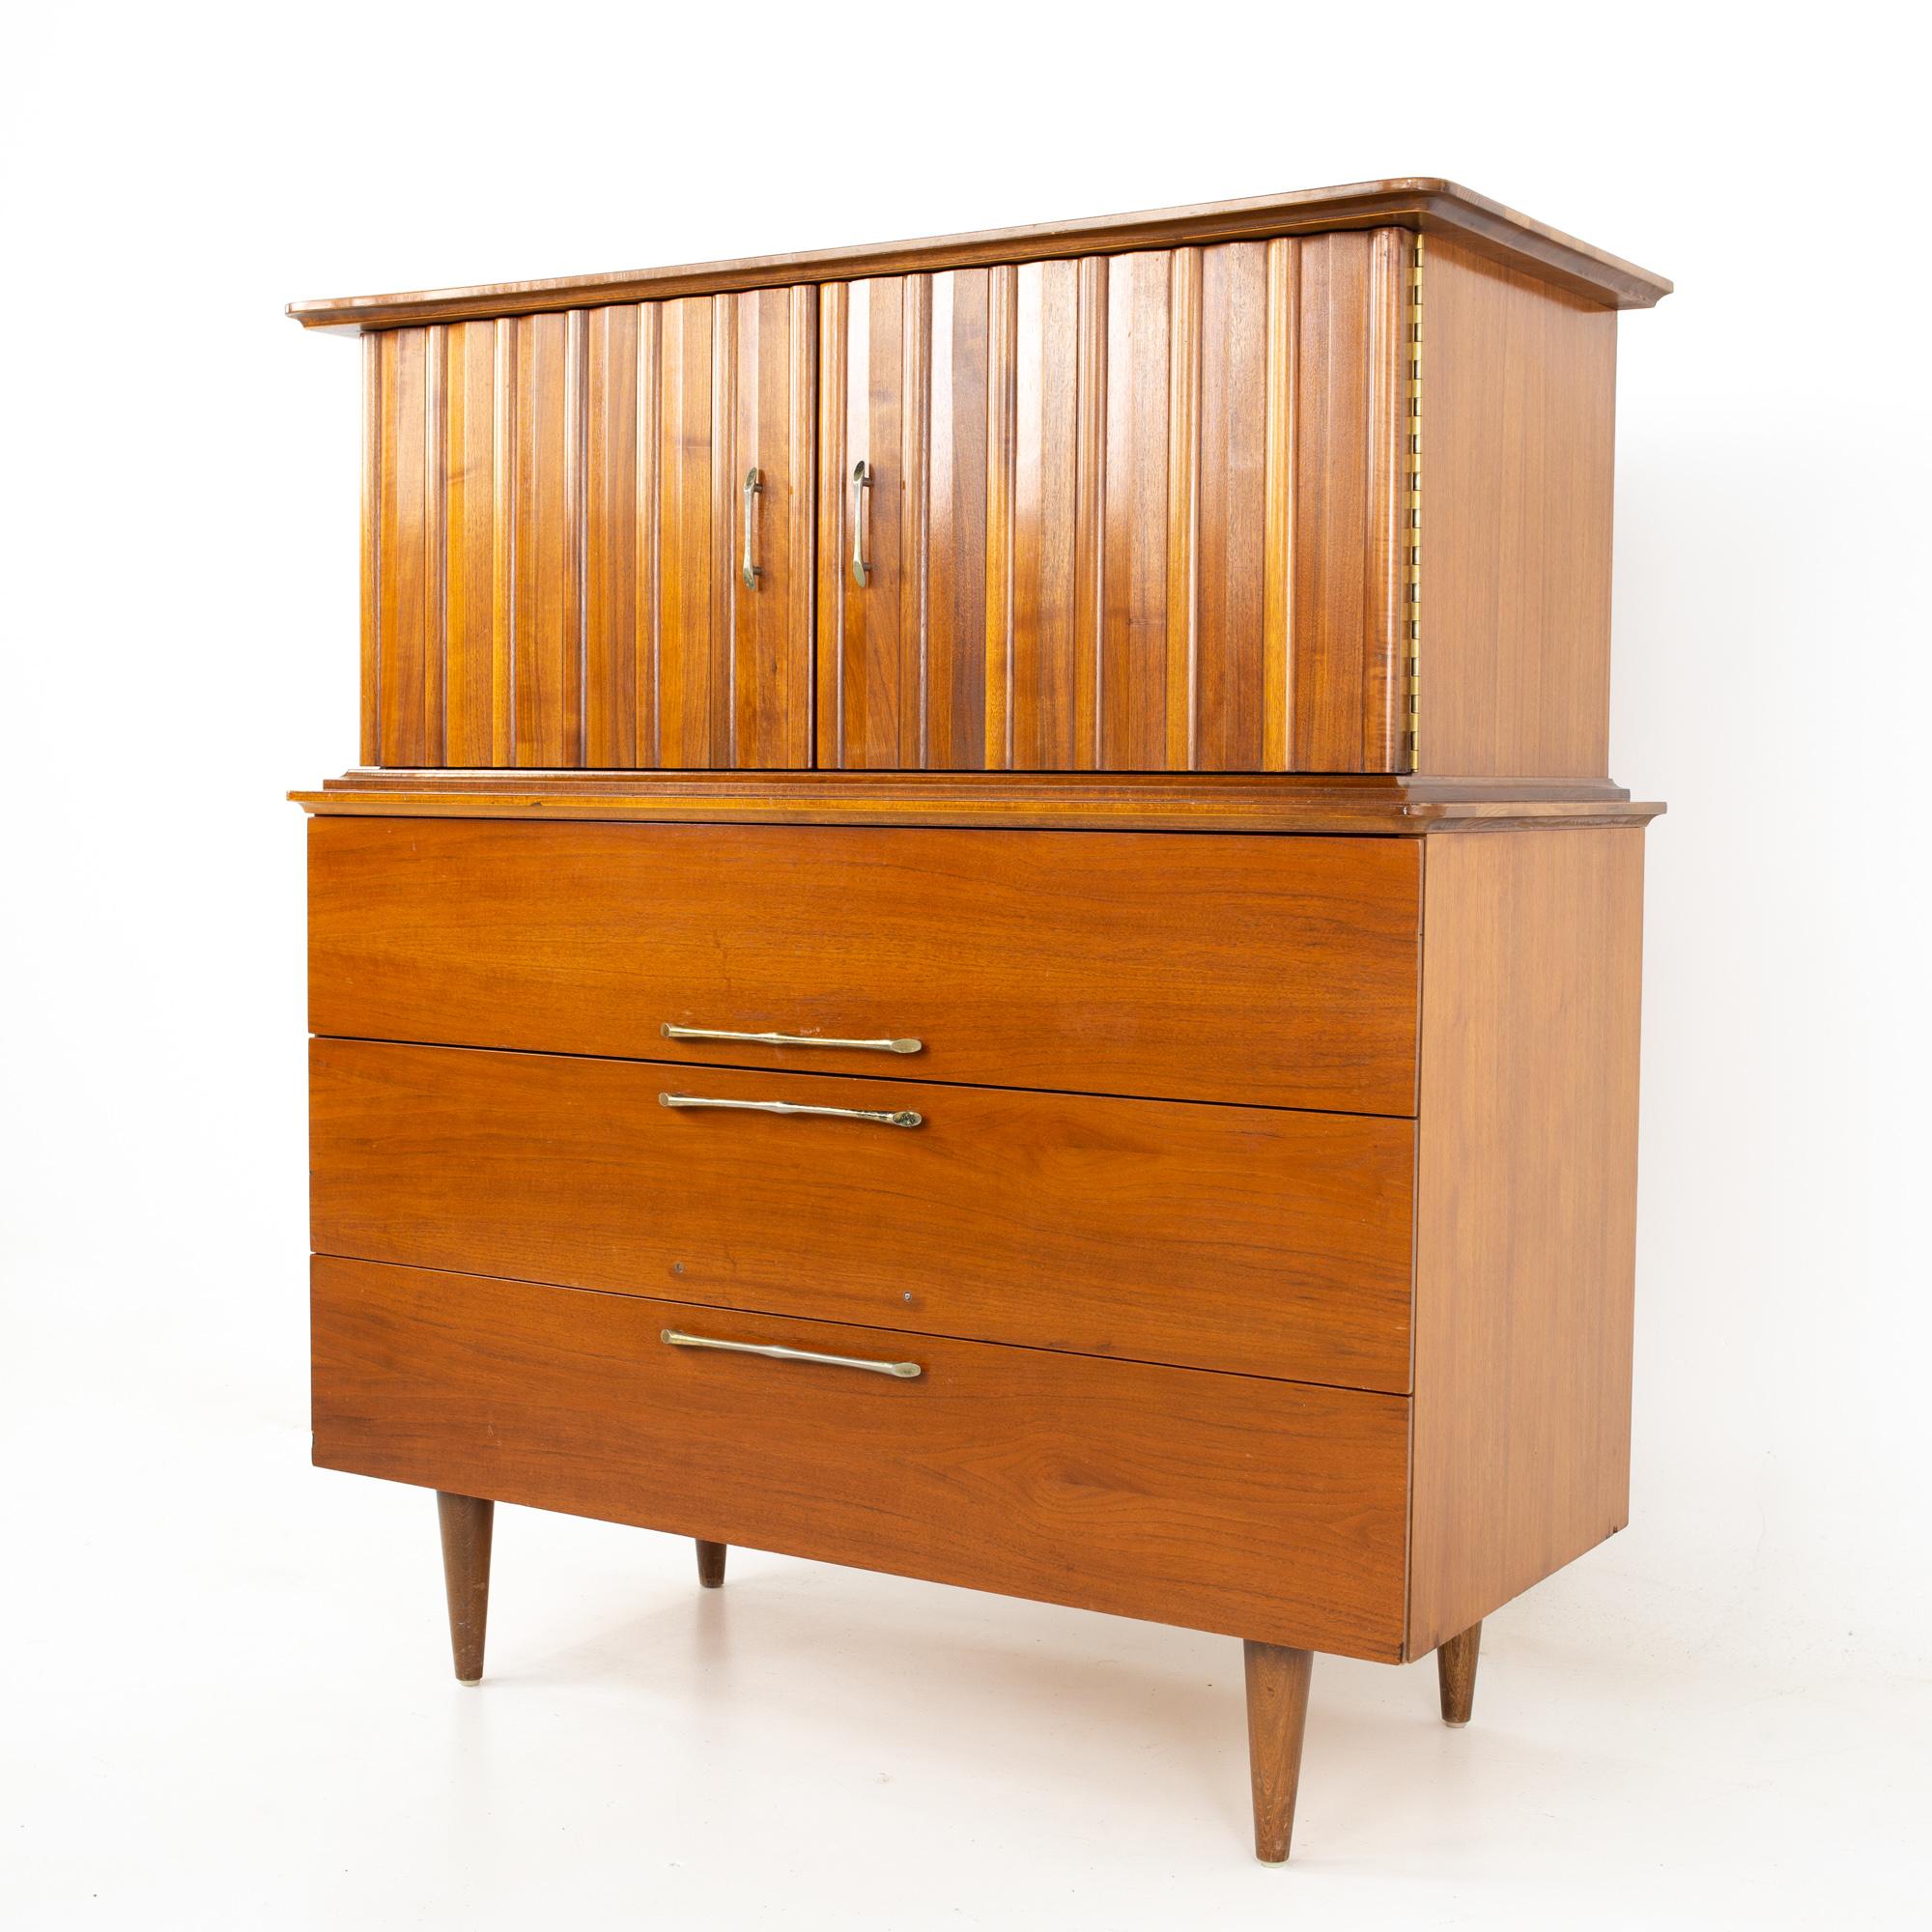 United style young manufacturing midcentury walnut and brass gentleman's chest highboy dresser
Dresser measures: 42 wide x 19 deep x 46.75 inches high

All pieces of furniture can be had in what we call restored vintage condition. That means the